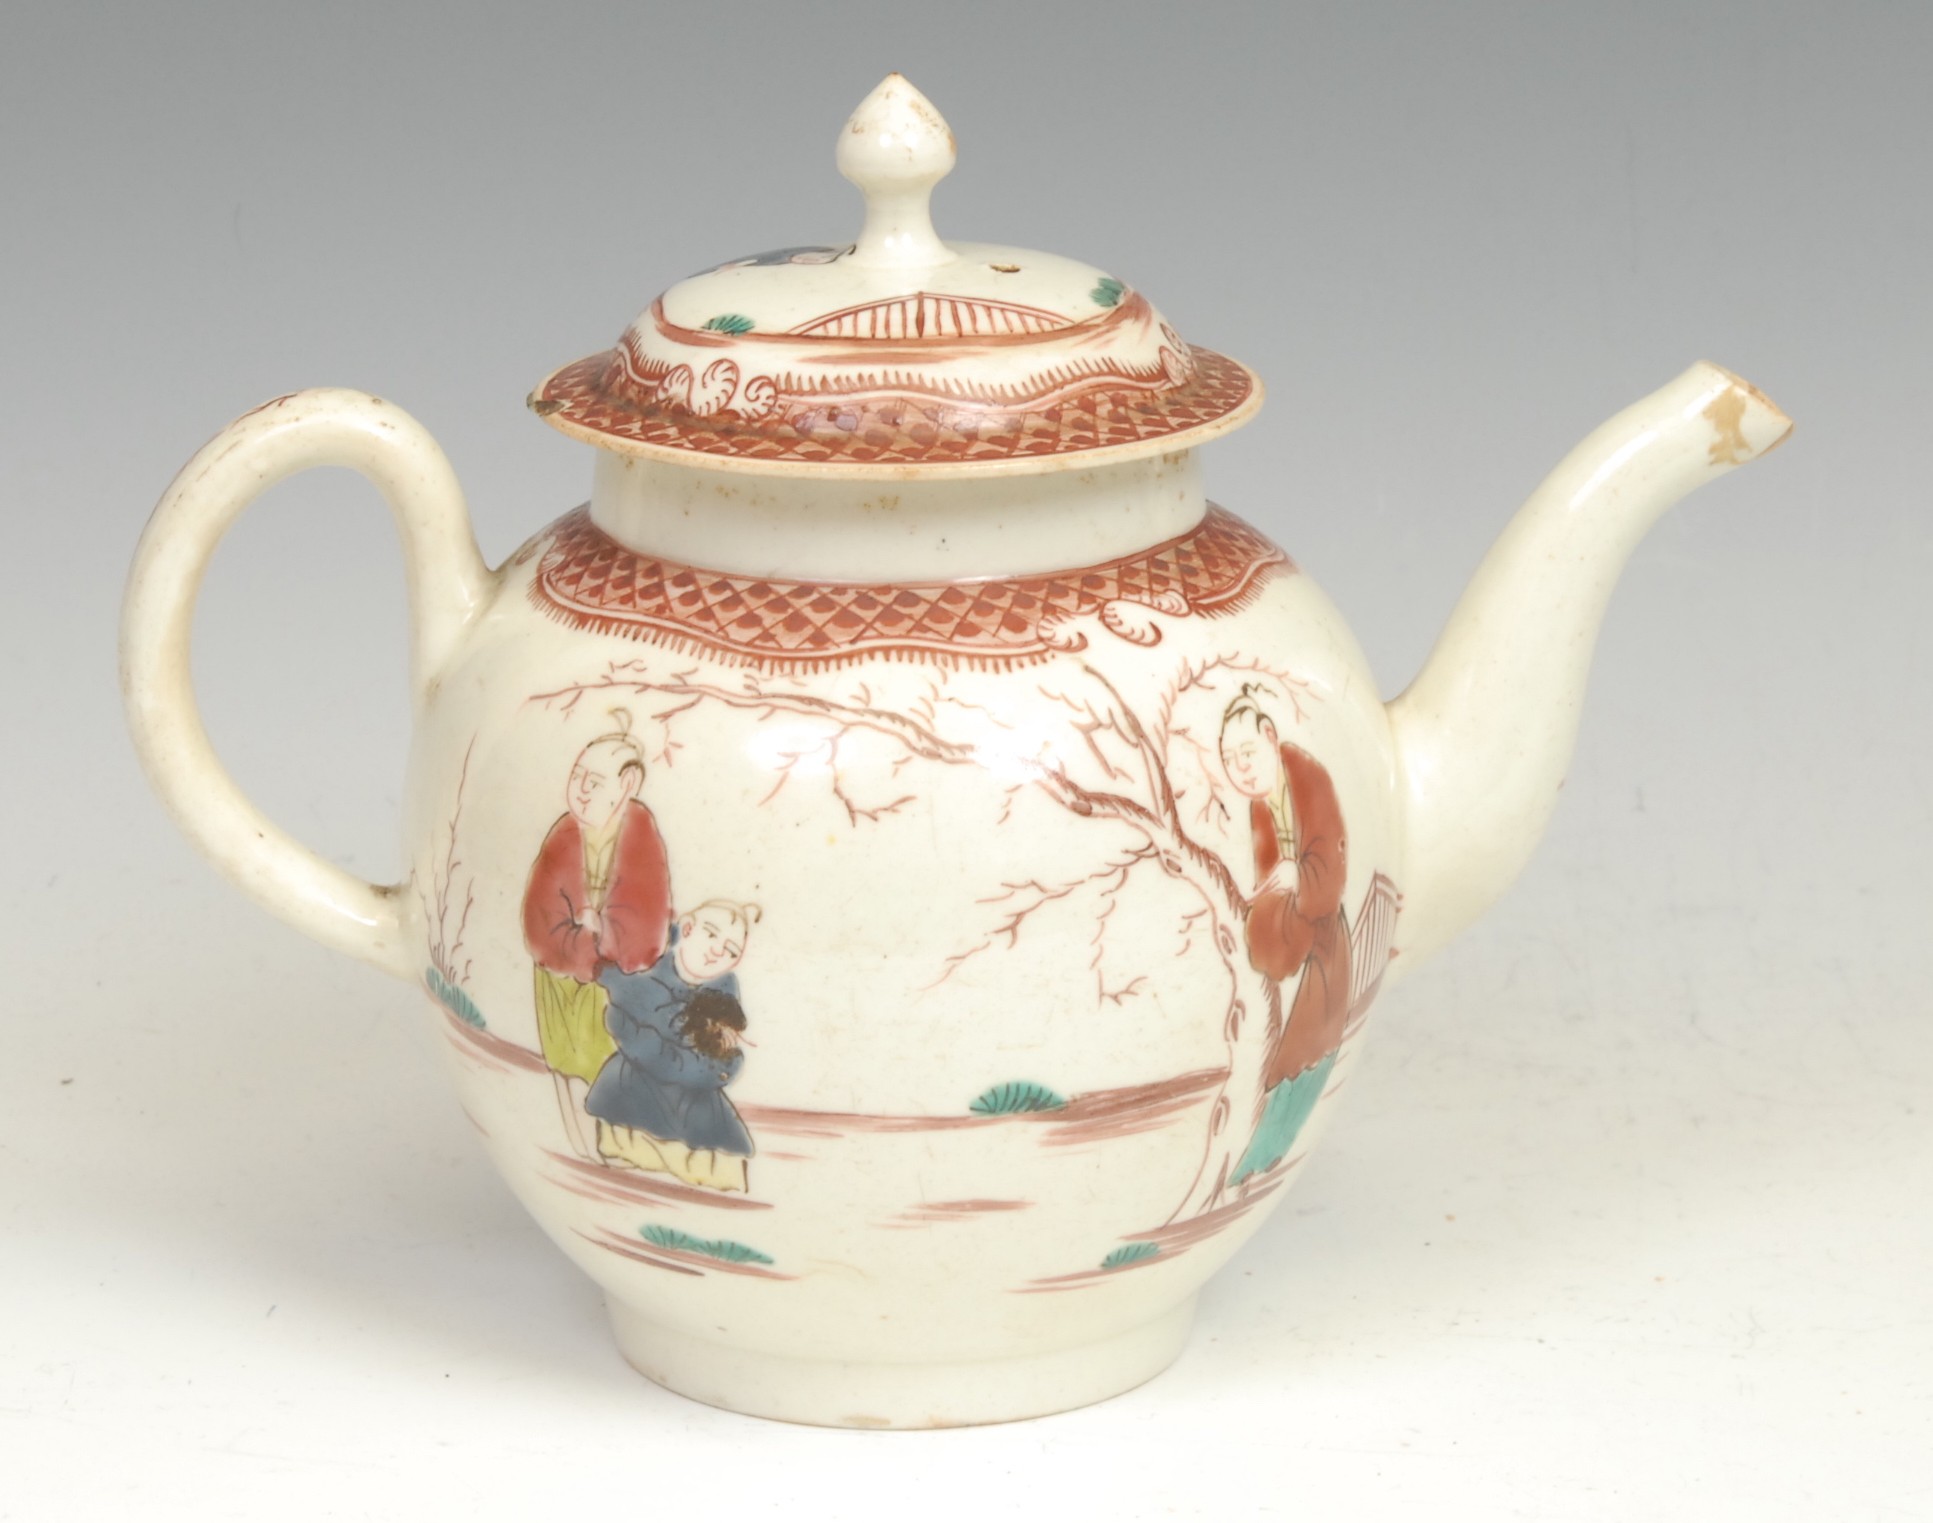 A Lowestoft globular teapot, painted in polychrome with Chinese figures, 21cm long, c.1770 - Image 2 of 2